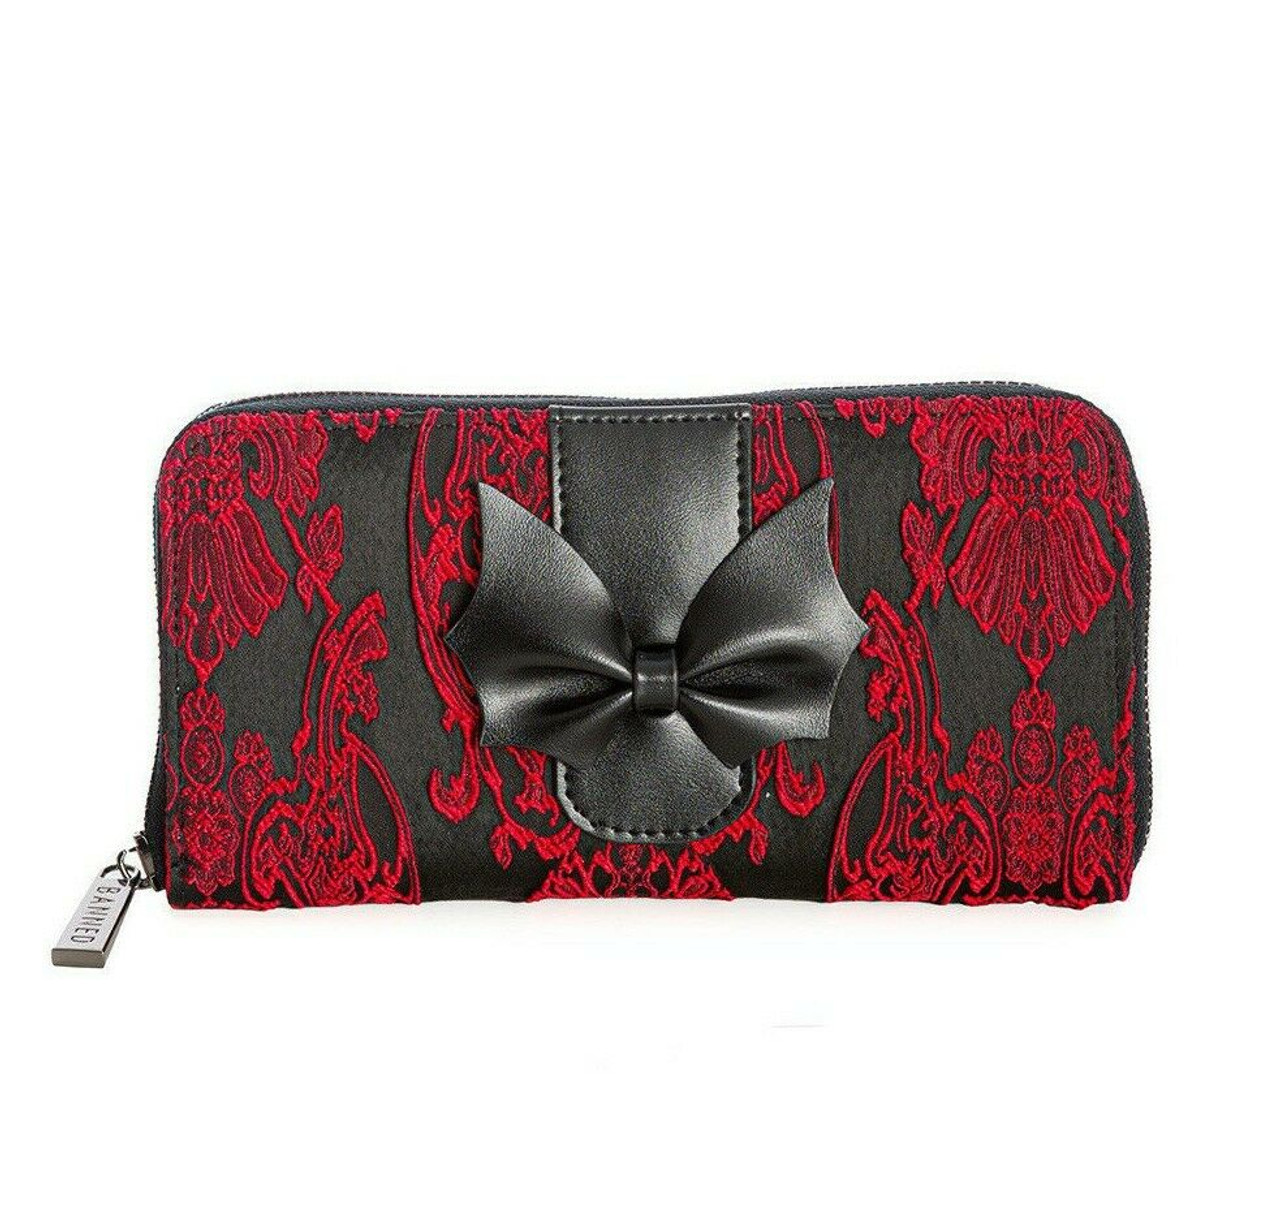 Lost Queen Maplesage Bat Bow Gothic Flocked Victorian Red Wallet WT41067RED